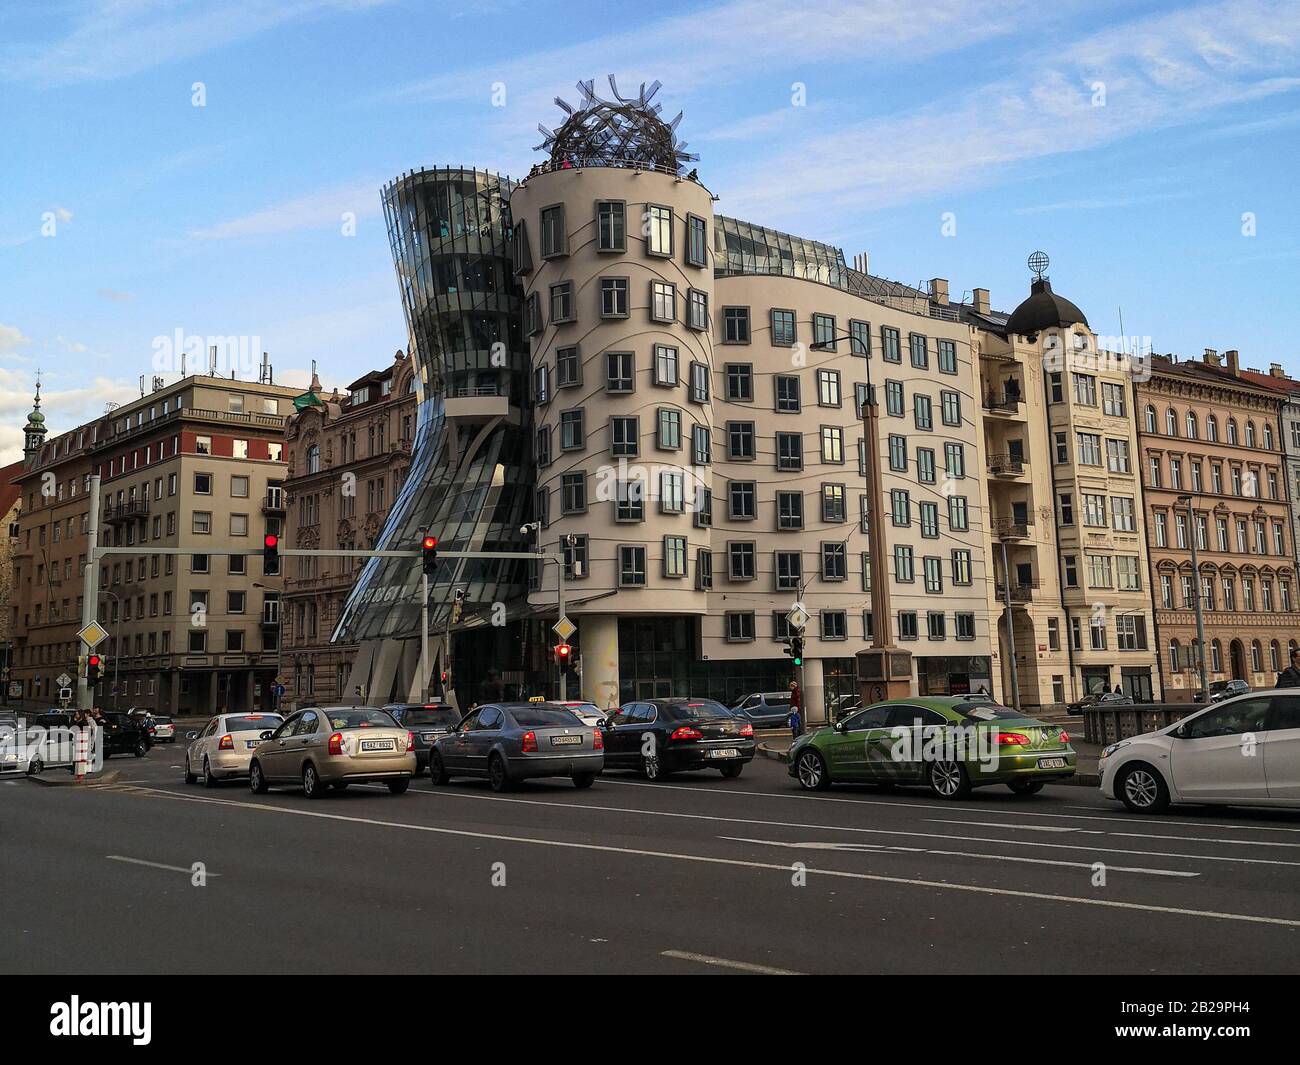 Famous dancing house building architecture in prague with car traffic transport Stock Photo